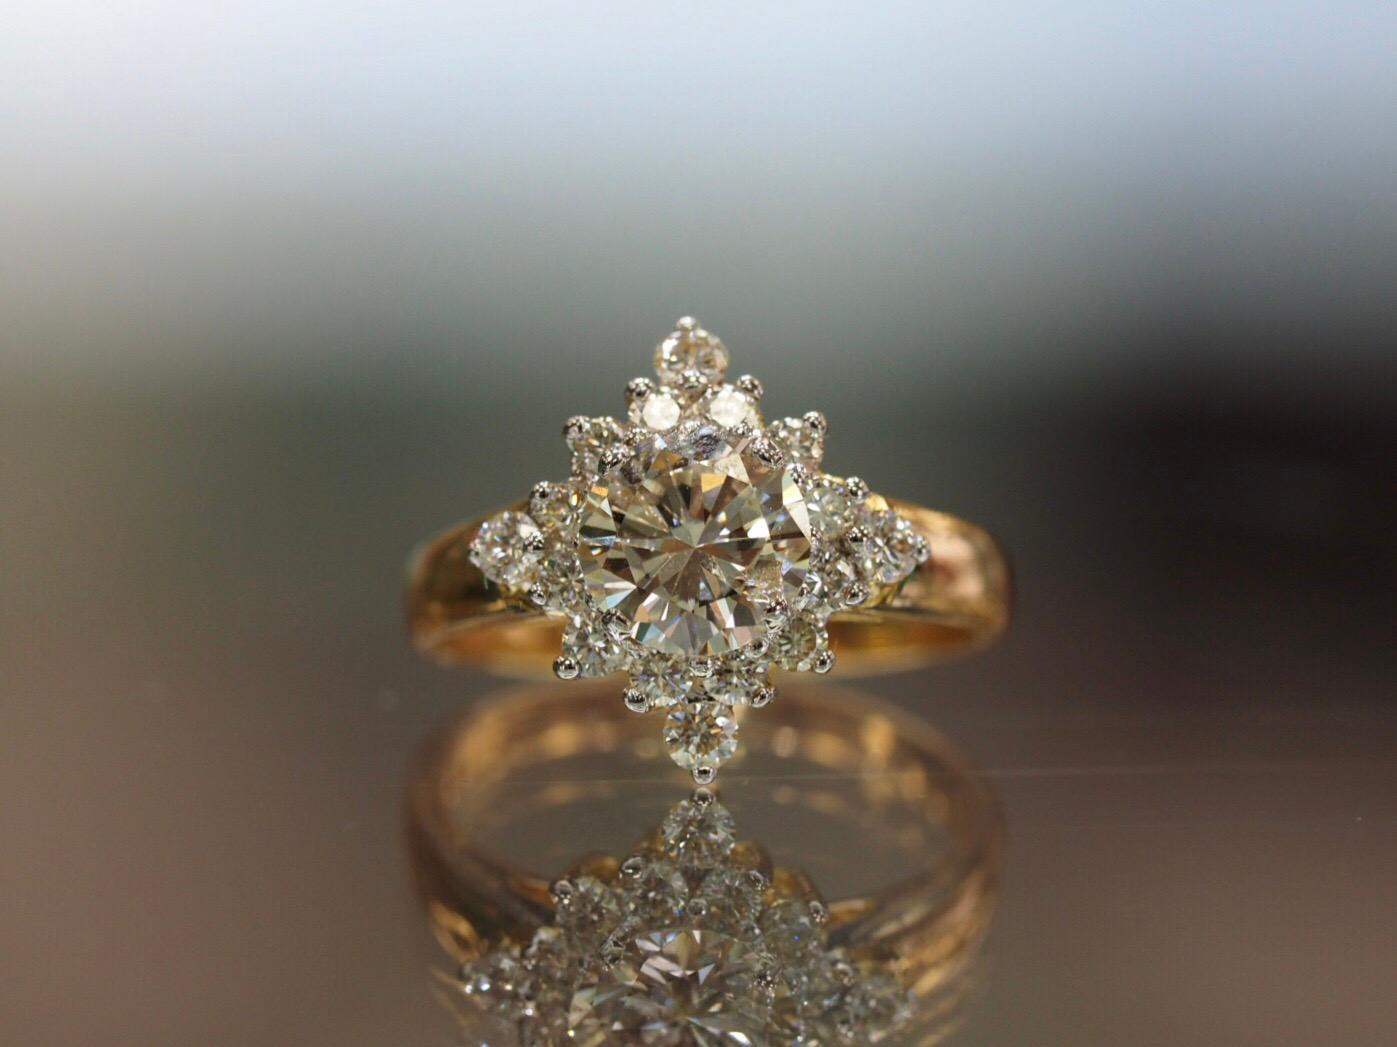 This stunning vintage diamond ring has the perfect starburst design surrounding a 1.16CT round brilliant diamond center that is J color, SI2 Clarity. (6.78mm X 6.82mm)The inclusion in the center stone is white and sitting right next to a prong